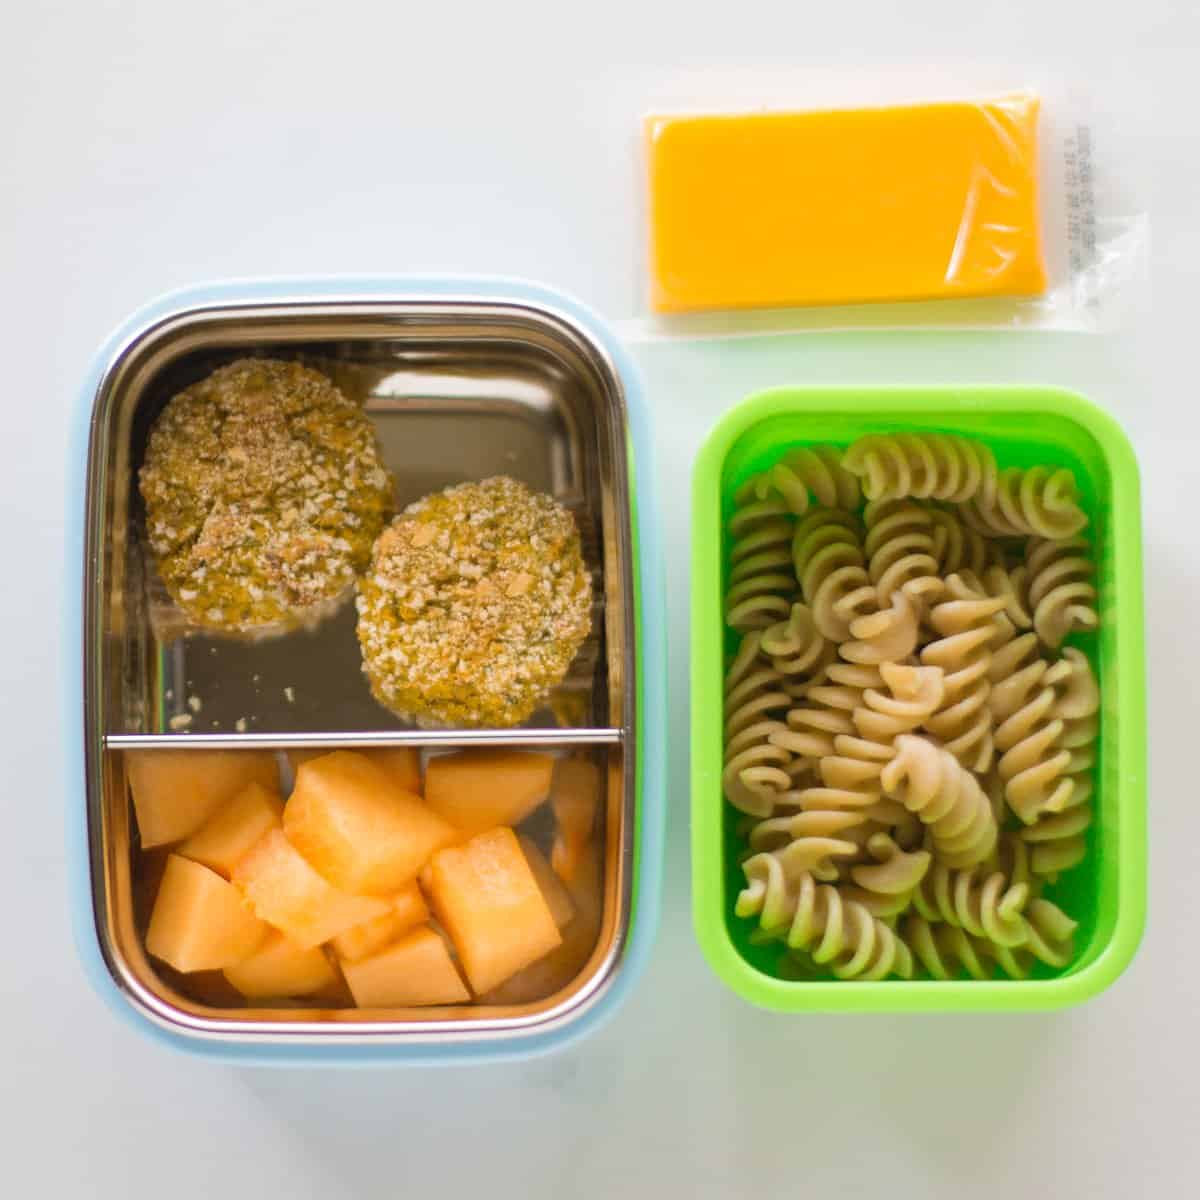 veggie nuggets with cantaloupe in bento box and cooked pasta with cheese in a small container.